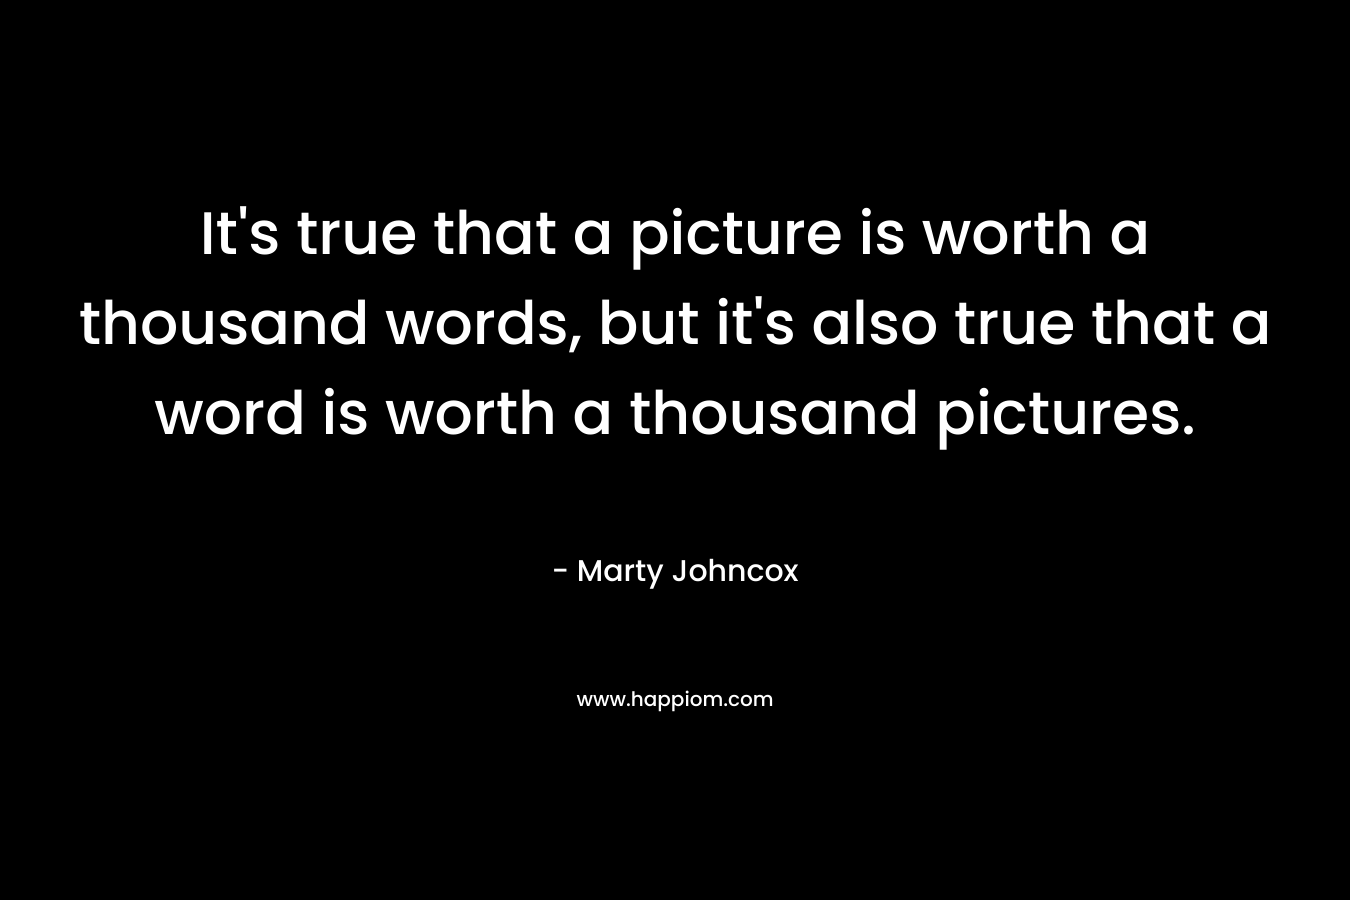 It’s true that a picture is worth a thousand words, but it’s also true that a word is worth a thousand pictures. – Marty Johncox